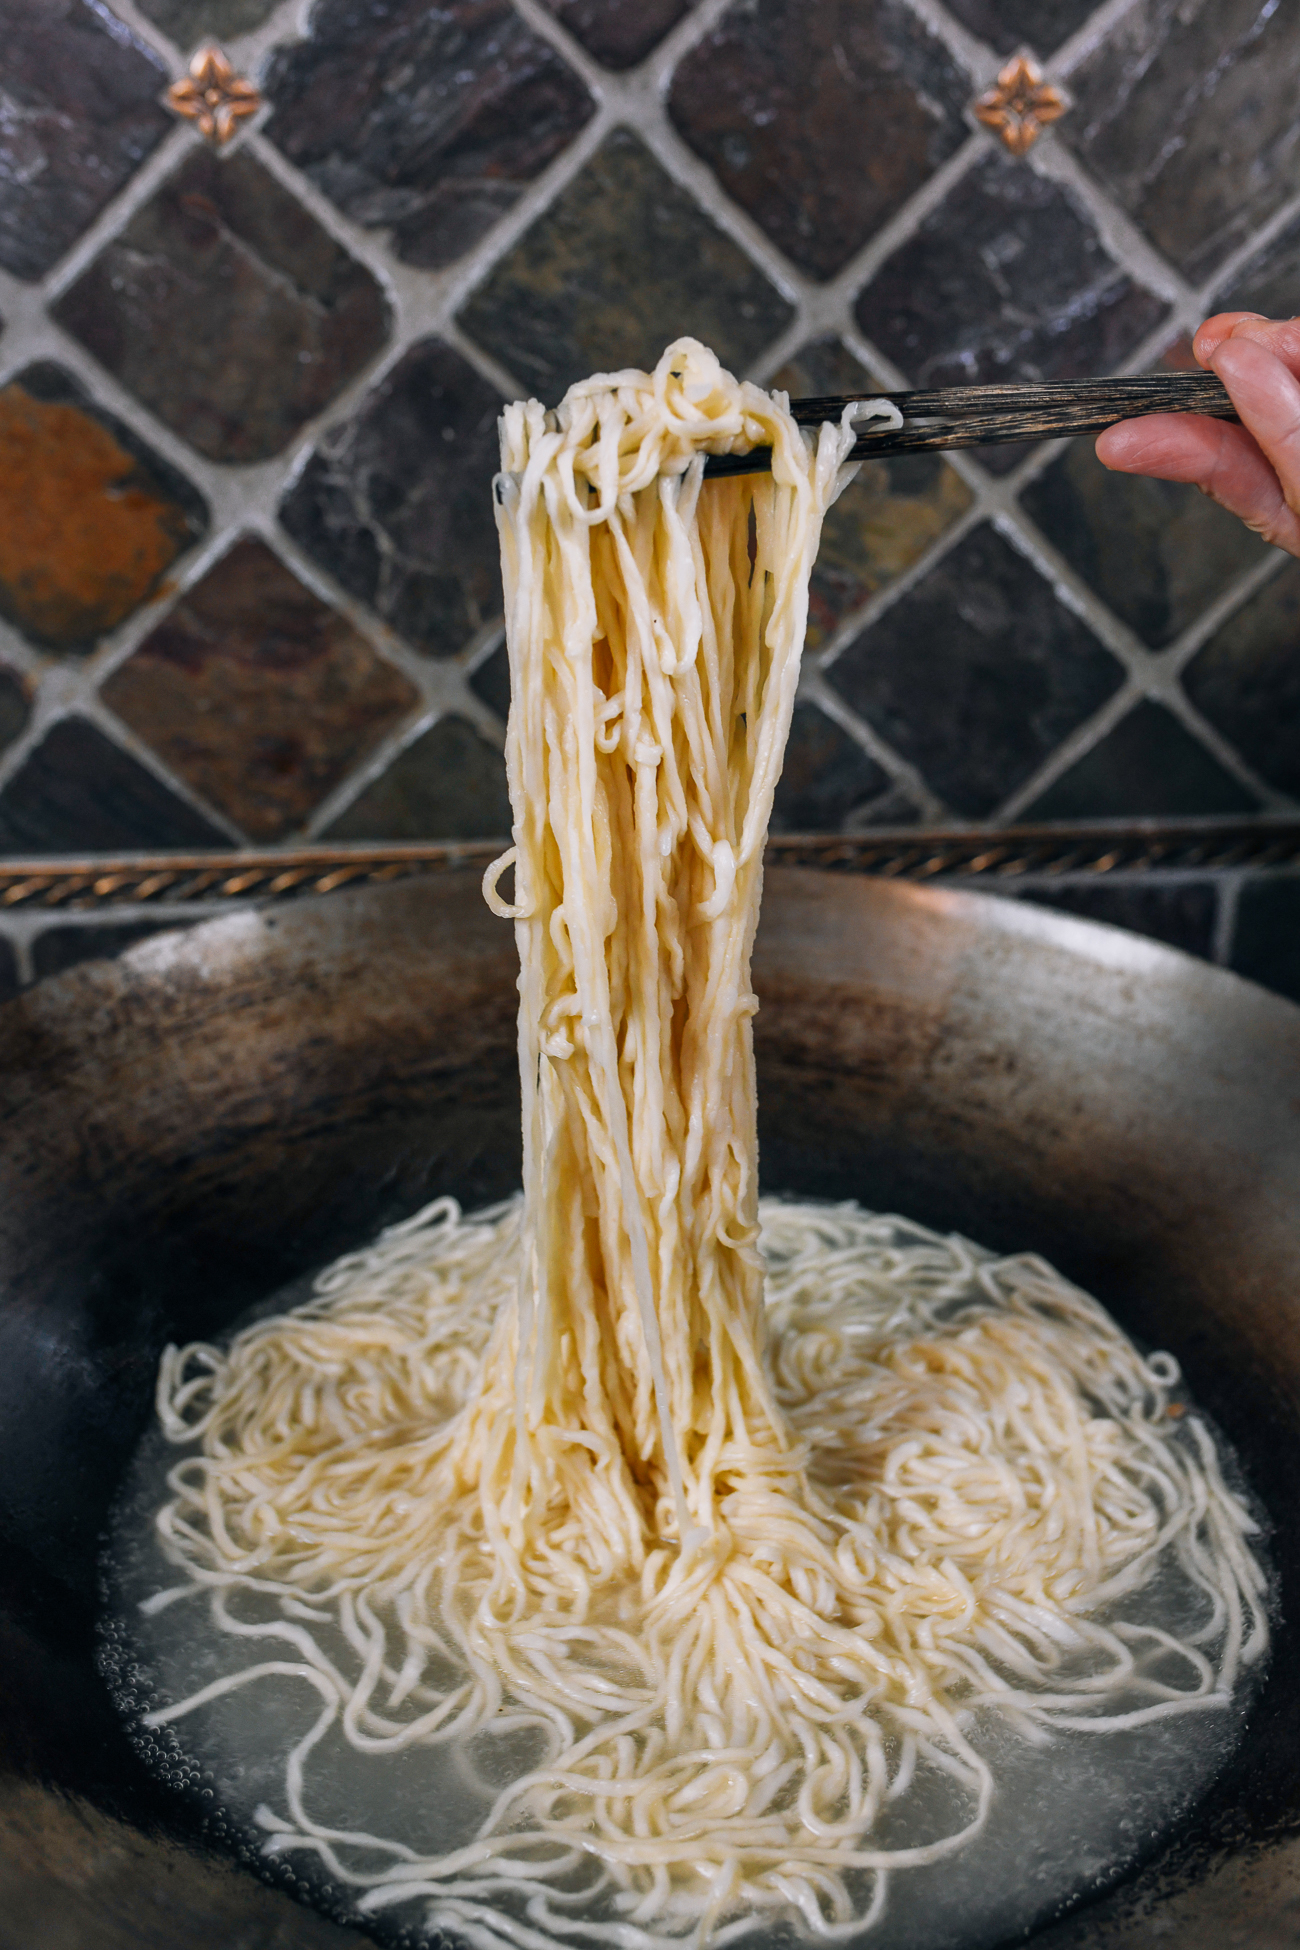 lifting cooked e-fu noodles (yee mein) out of boiling water